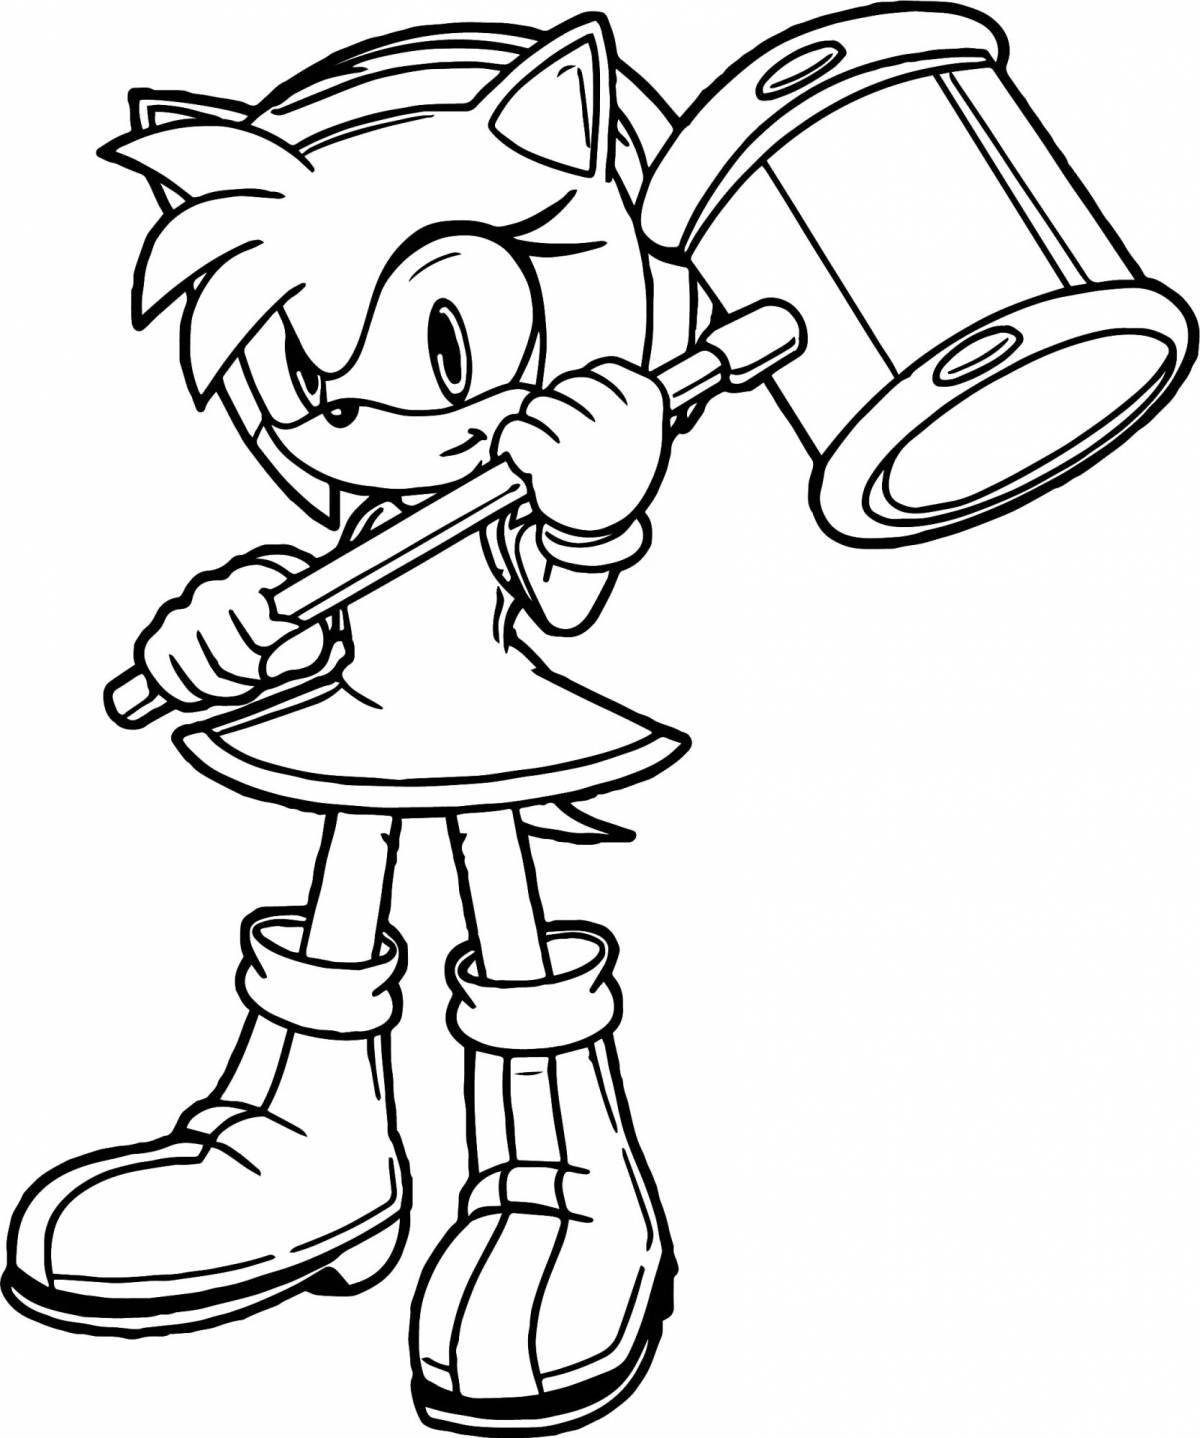 Sonic girl live coloring